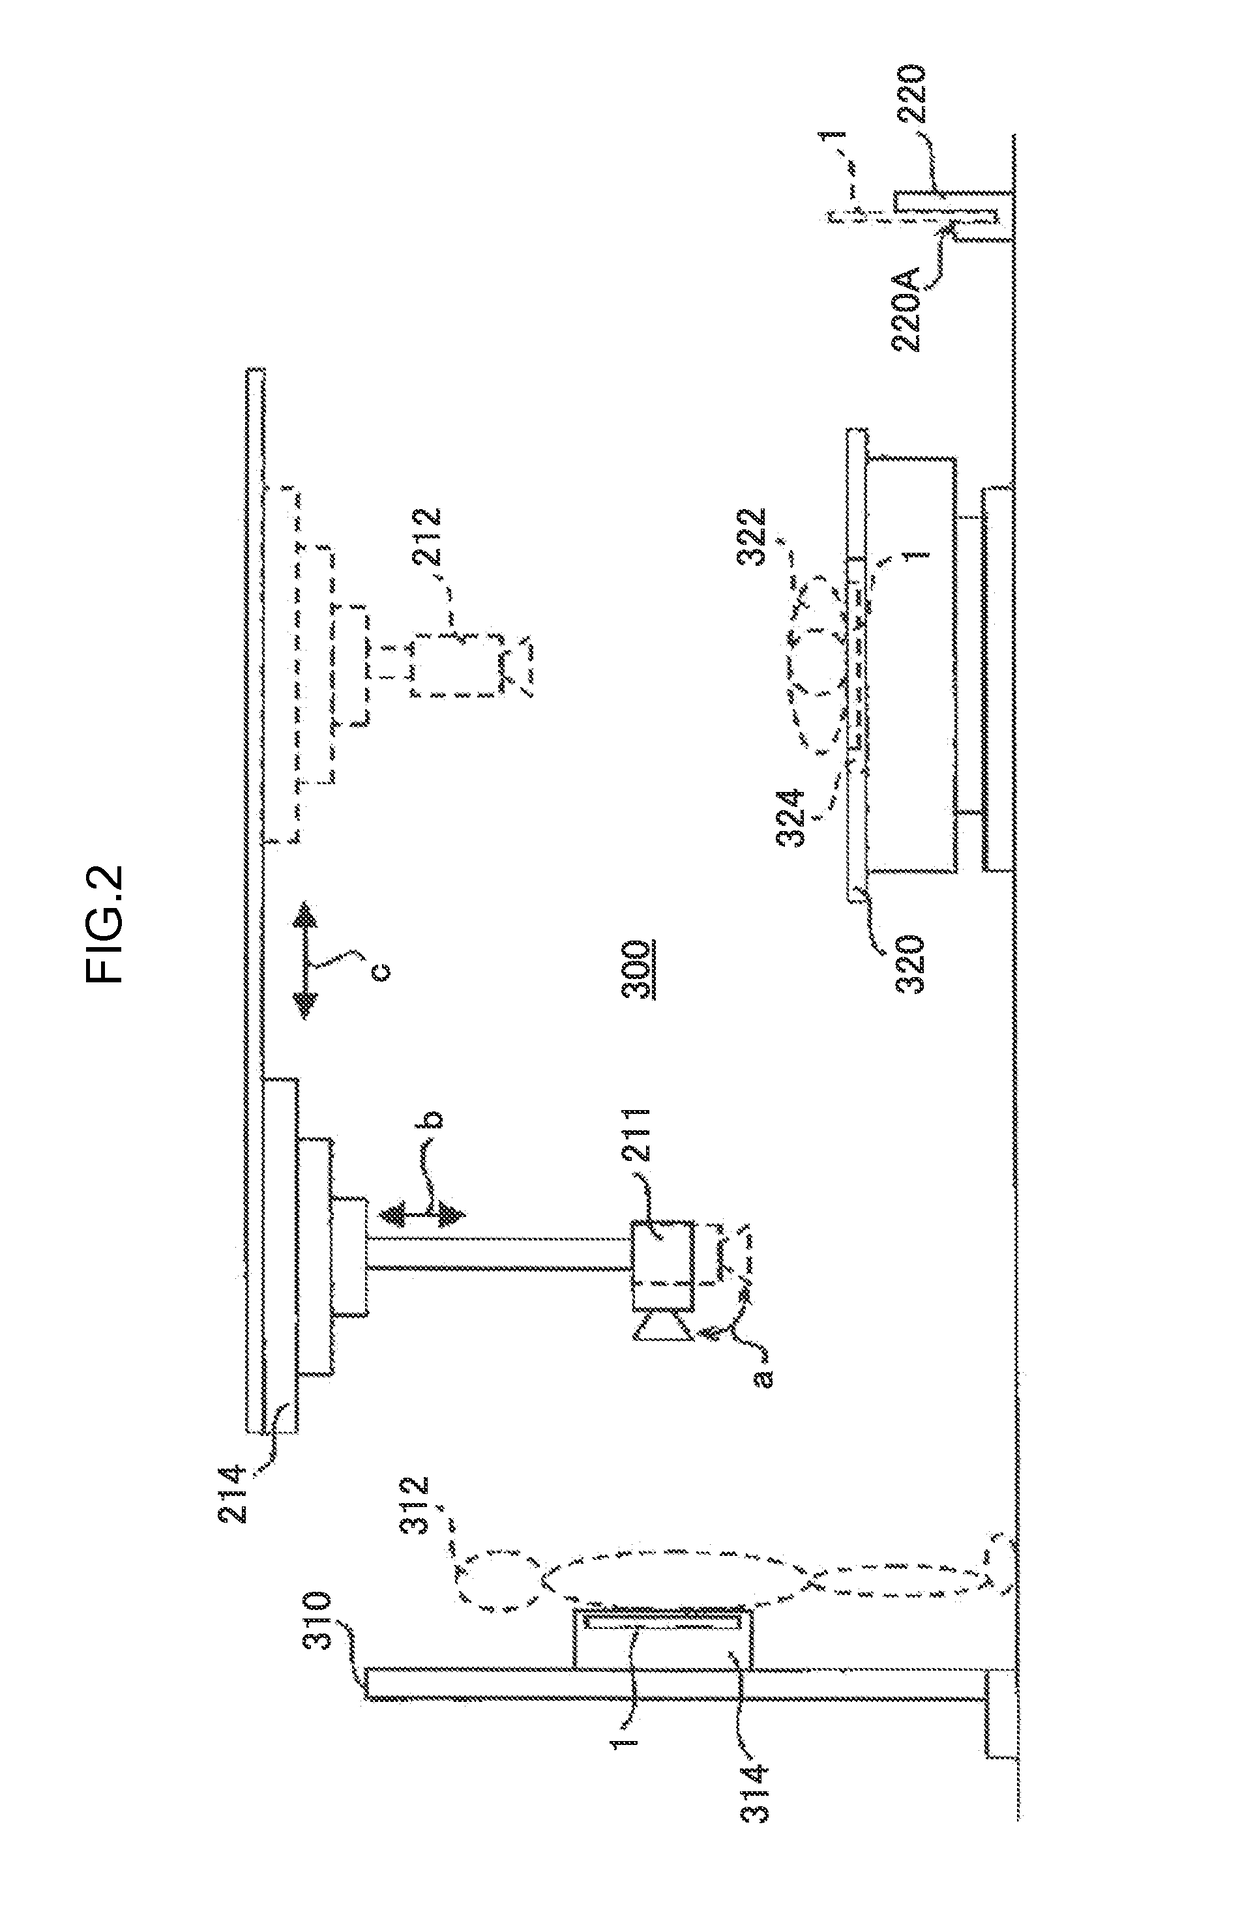 Radiographic image capturing device, method for detecting radiation doses, and computer readable storage medium